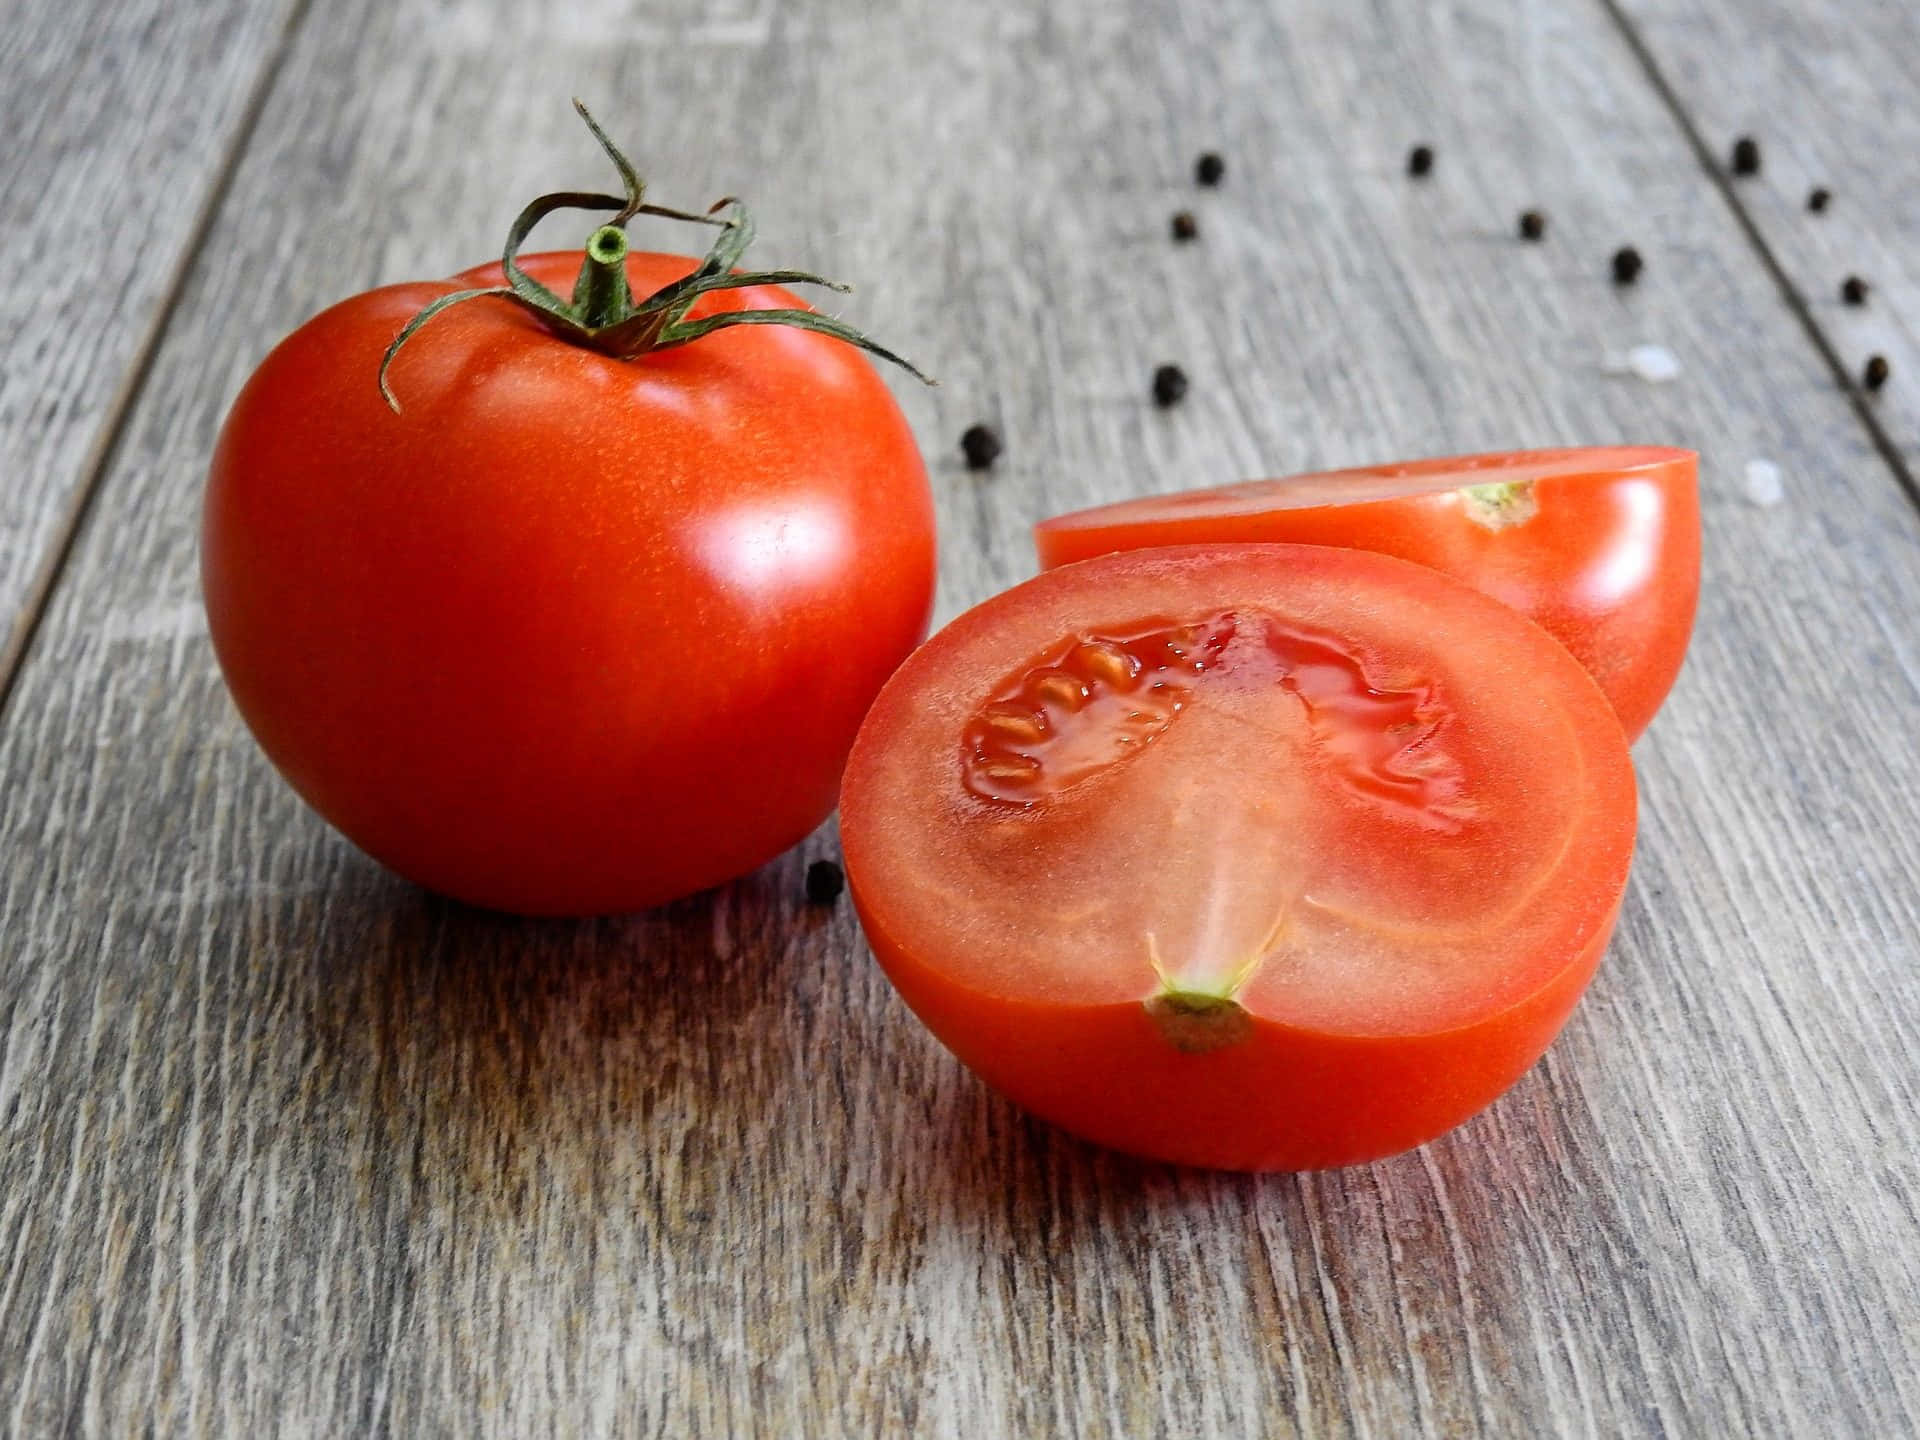 Fresh and juicy tomatoes, perfect for summer salads